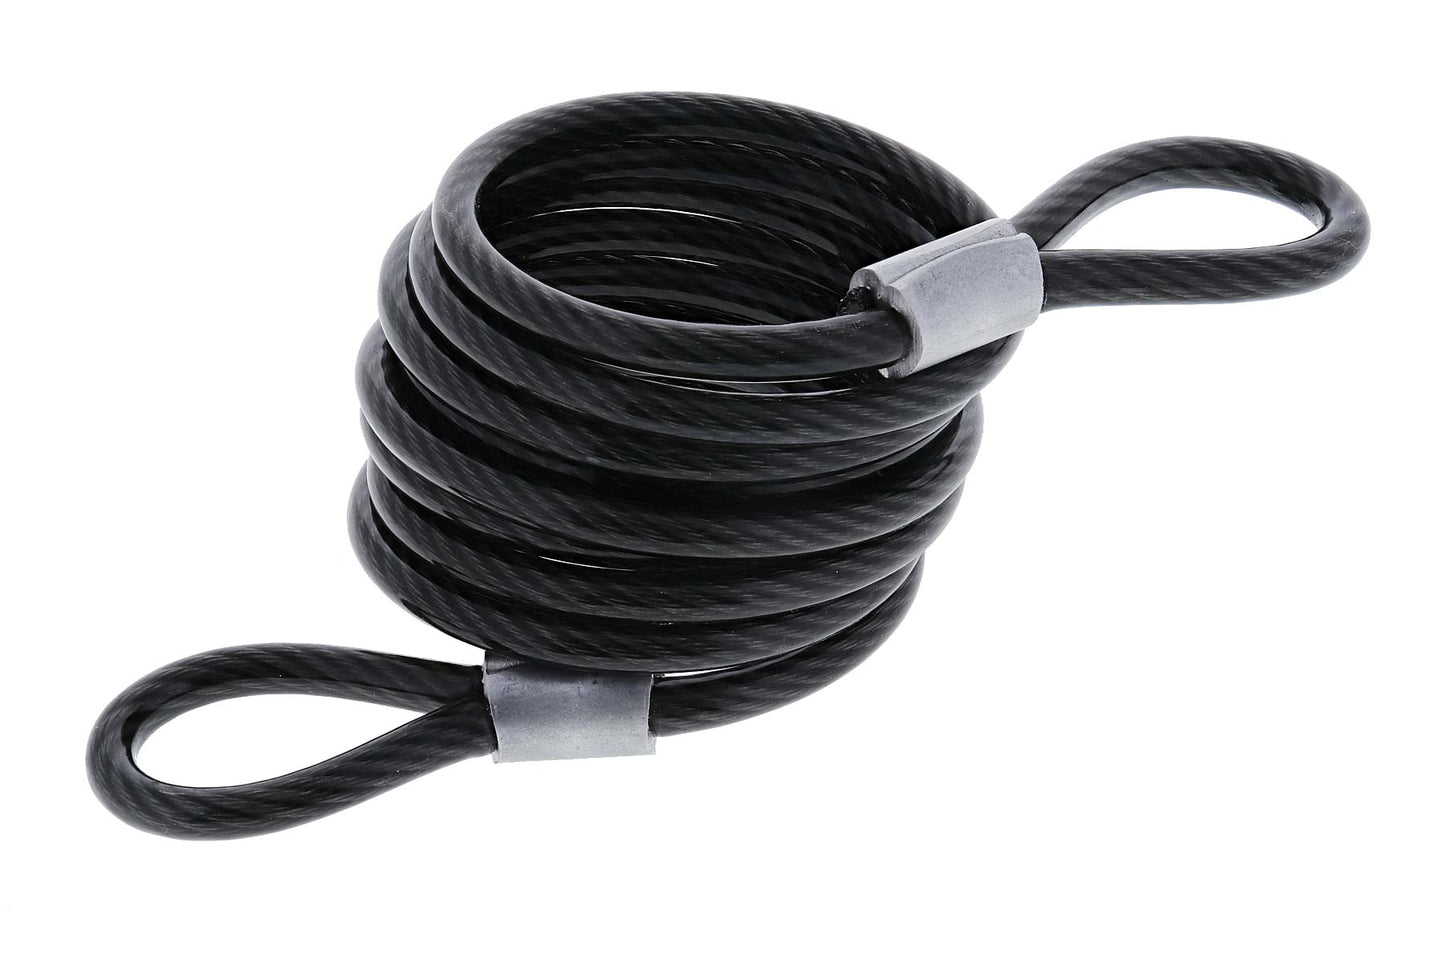 Carbine C30016cb Vinyl coated cable, 6.3MM x 1800MM